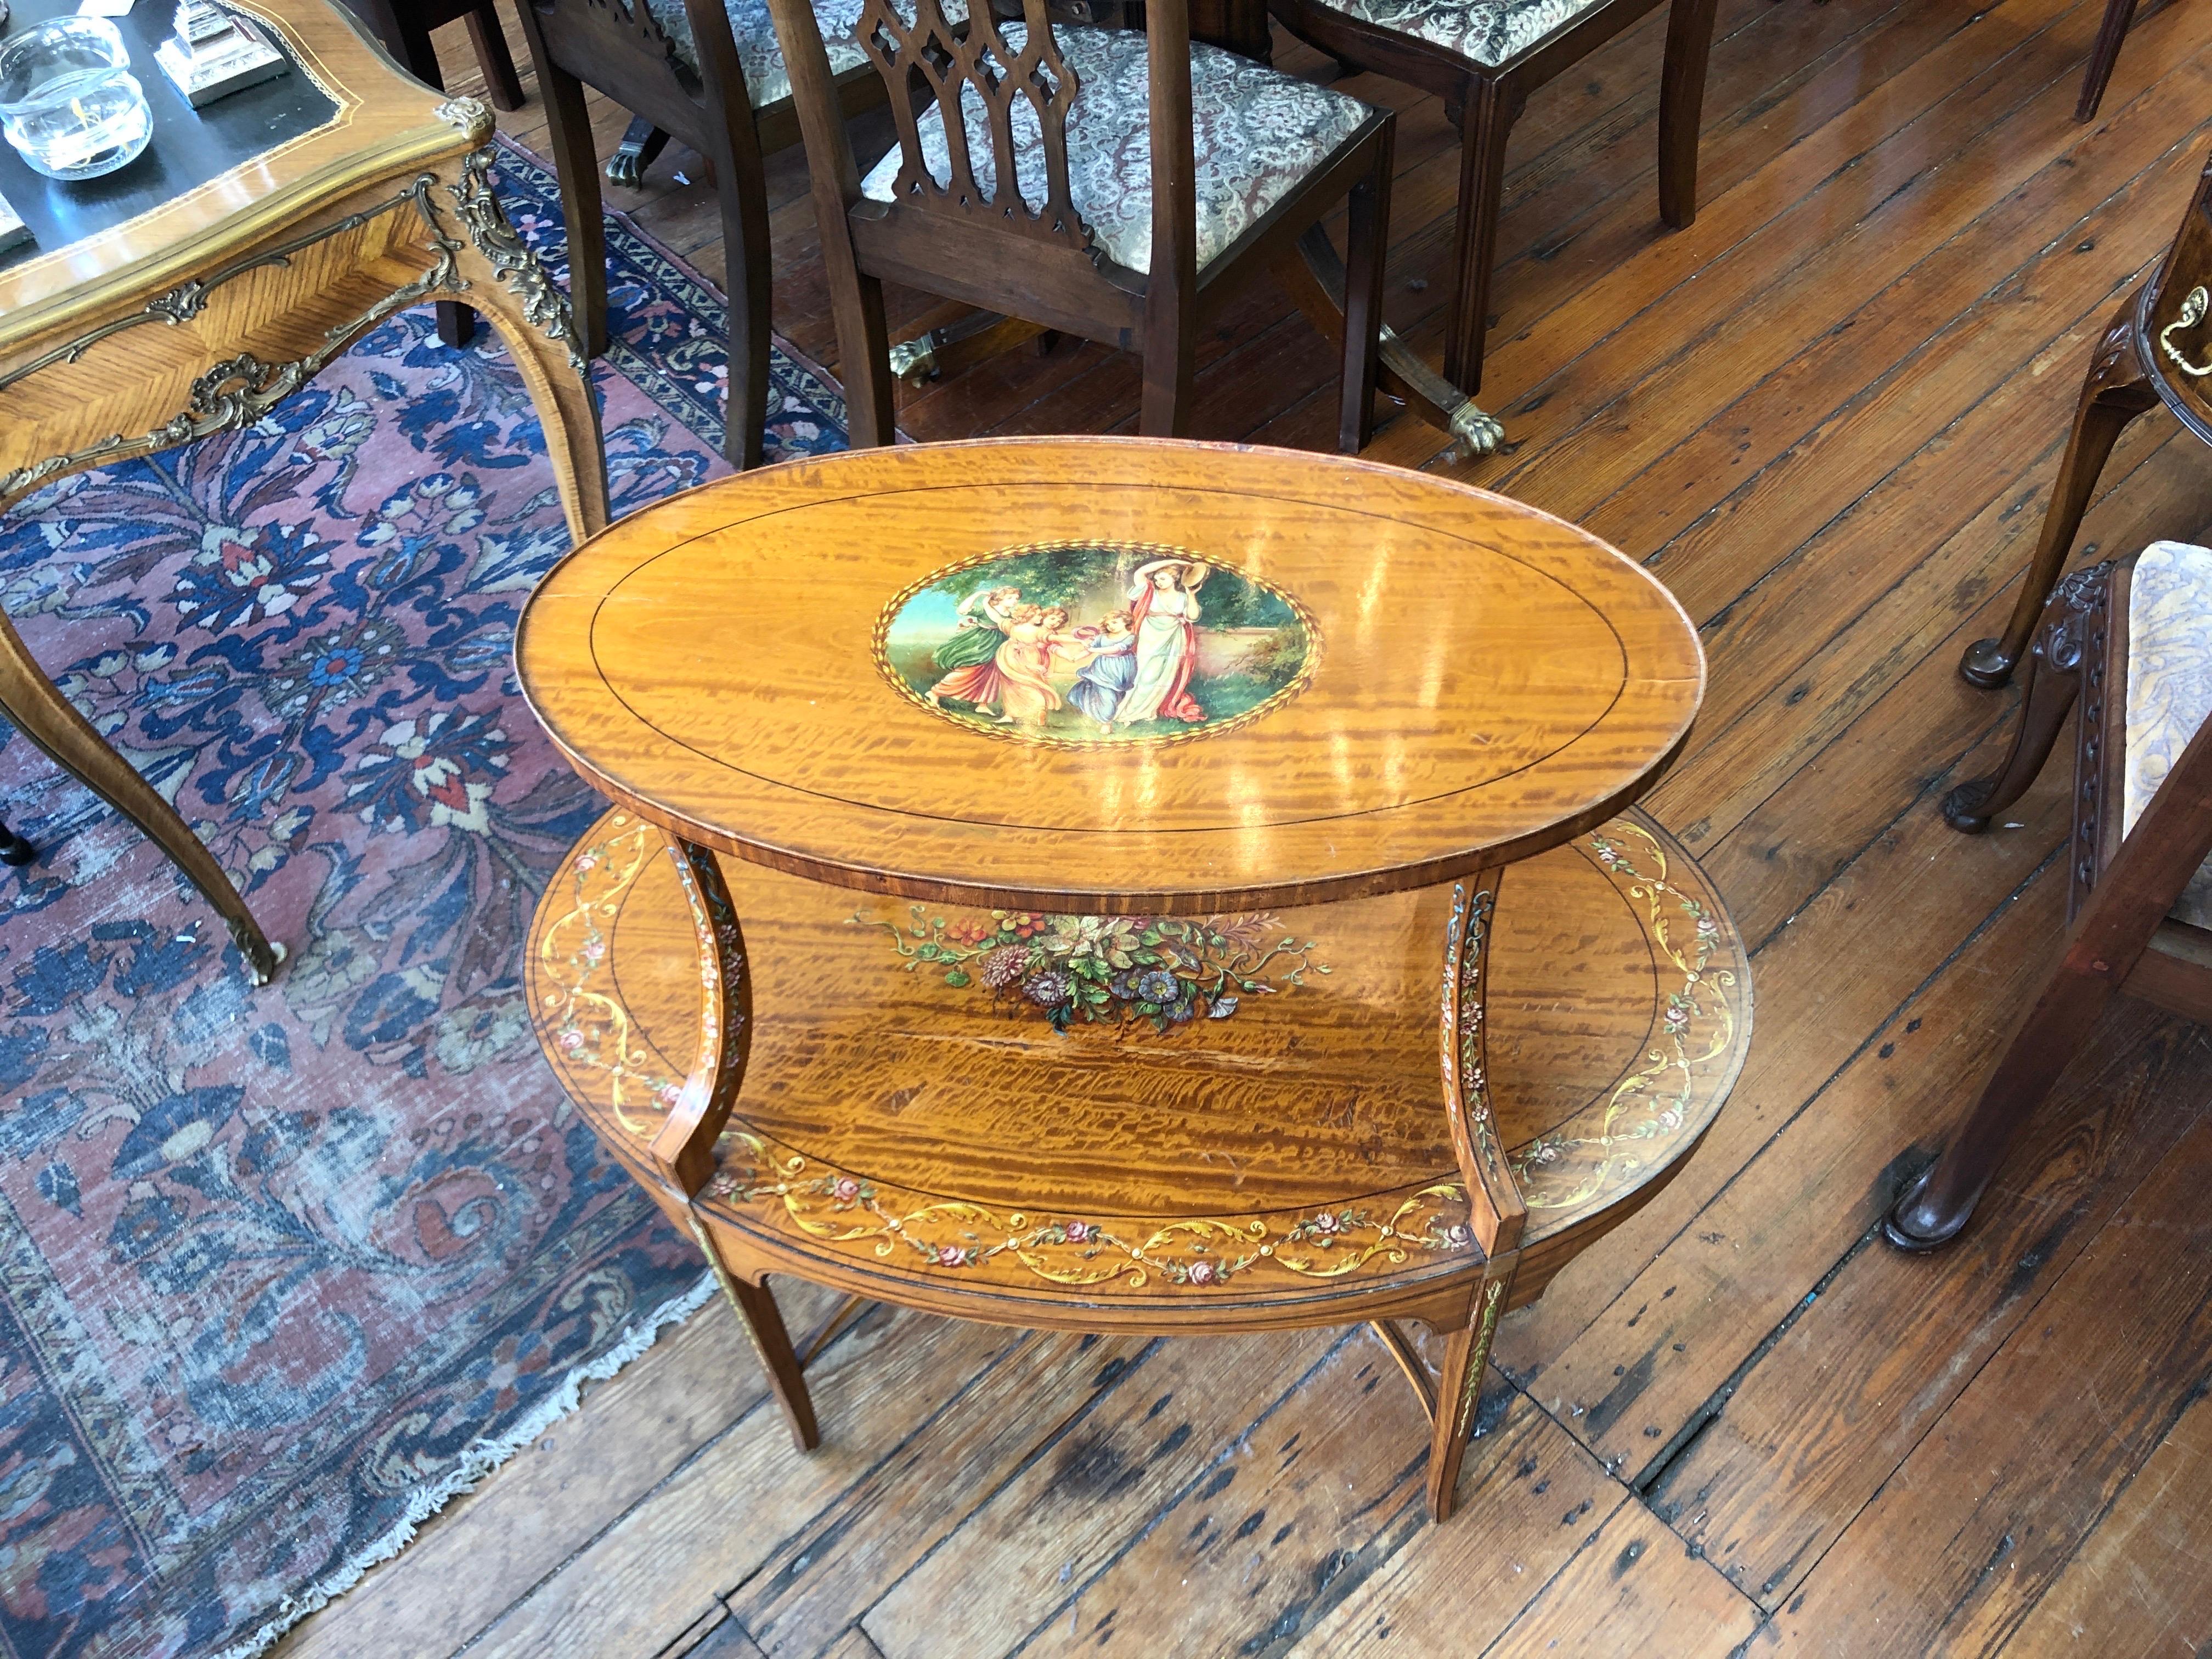 This is a fabulous Antique English hand painted and inlaid Adam Style oval two-tier Dessert or Serving Table. The painting is exceptionally well-done by artists who likely painted furniture as well as on canvas. The primary wood being satinwood